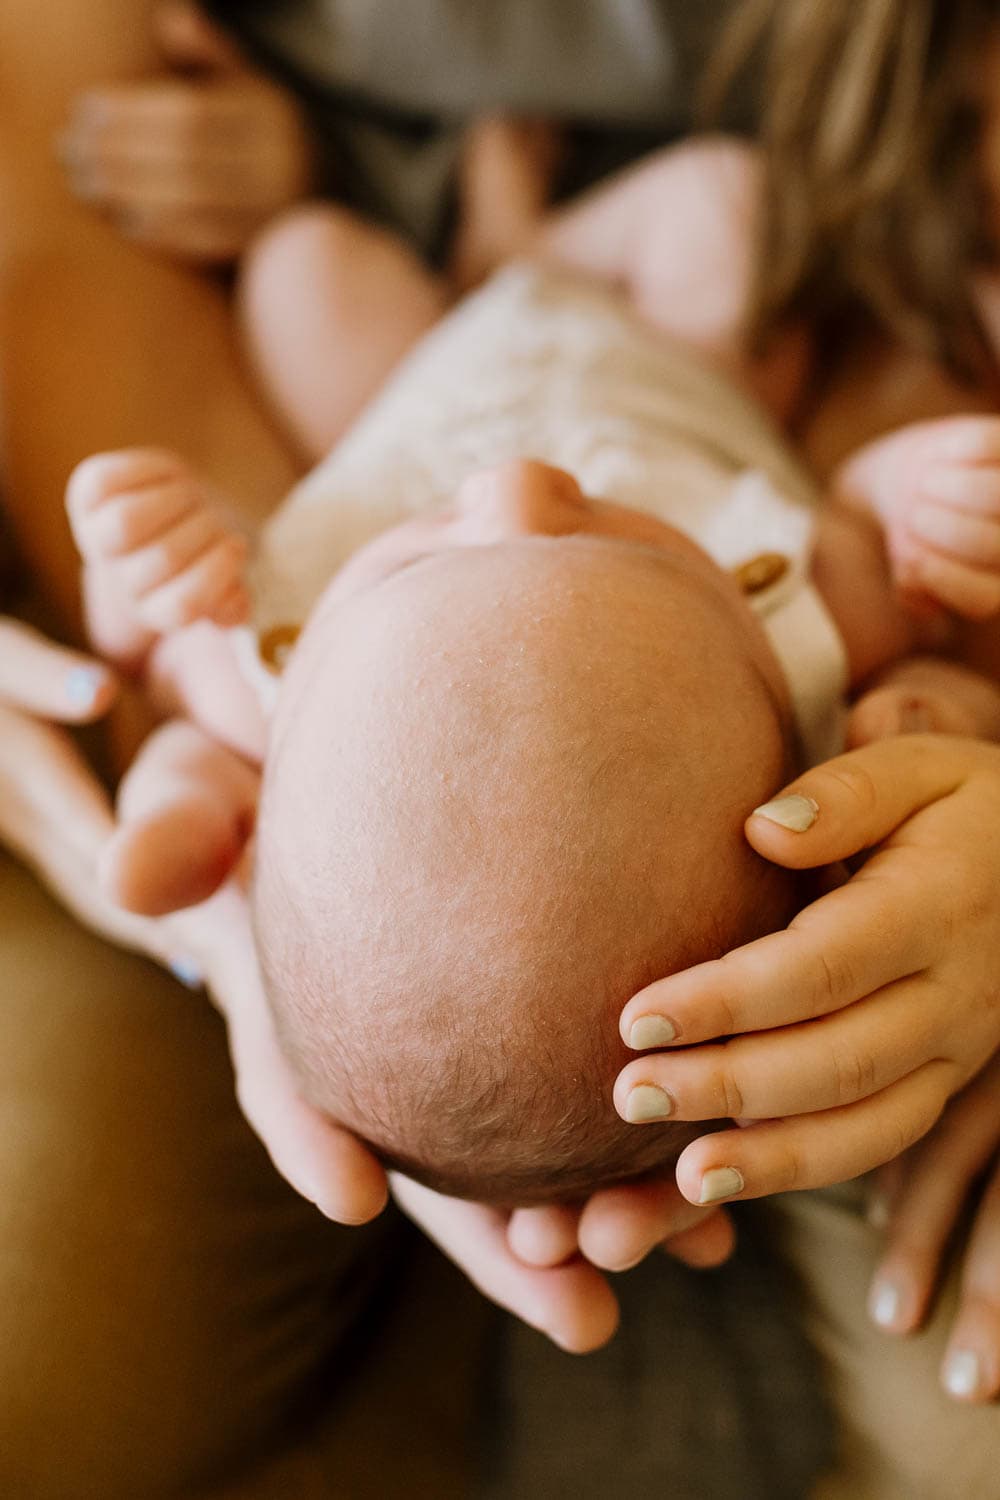 newborn baby being held by family's hands